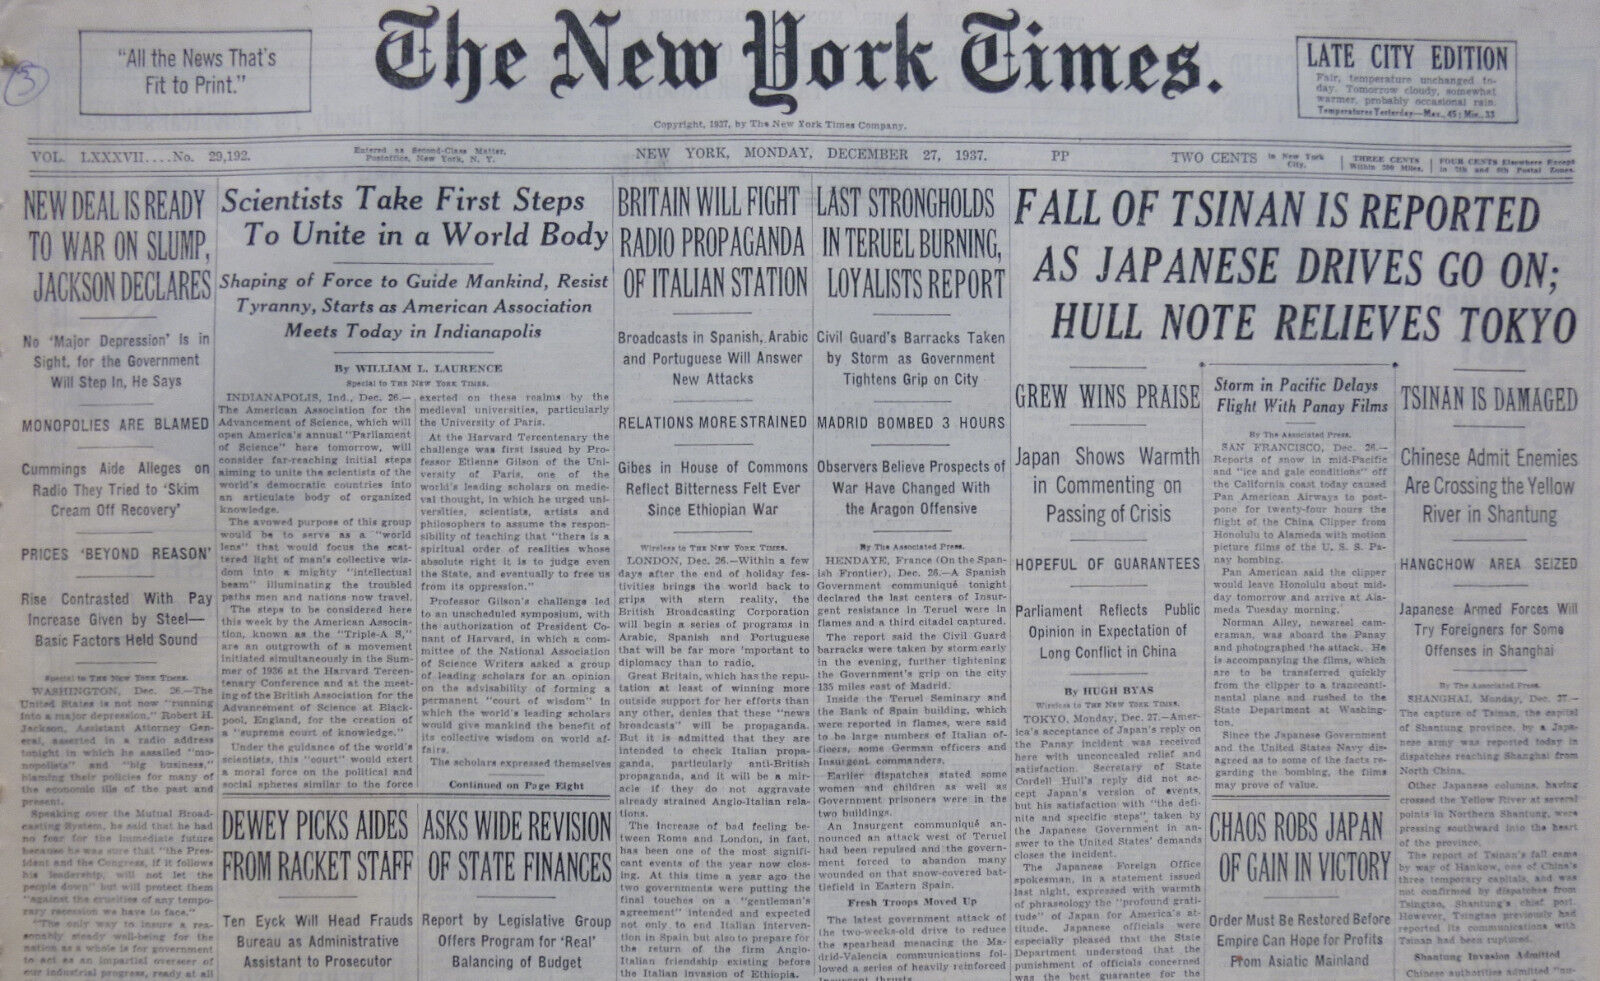 12-1937 December 27 FALL OF TSINAN IS REPORTED AS JAPANESE DRIVE GO ON. TOKYO